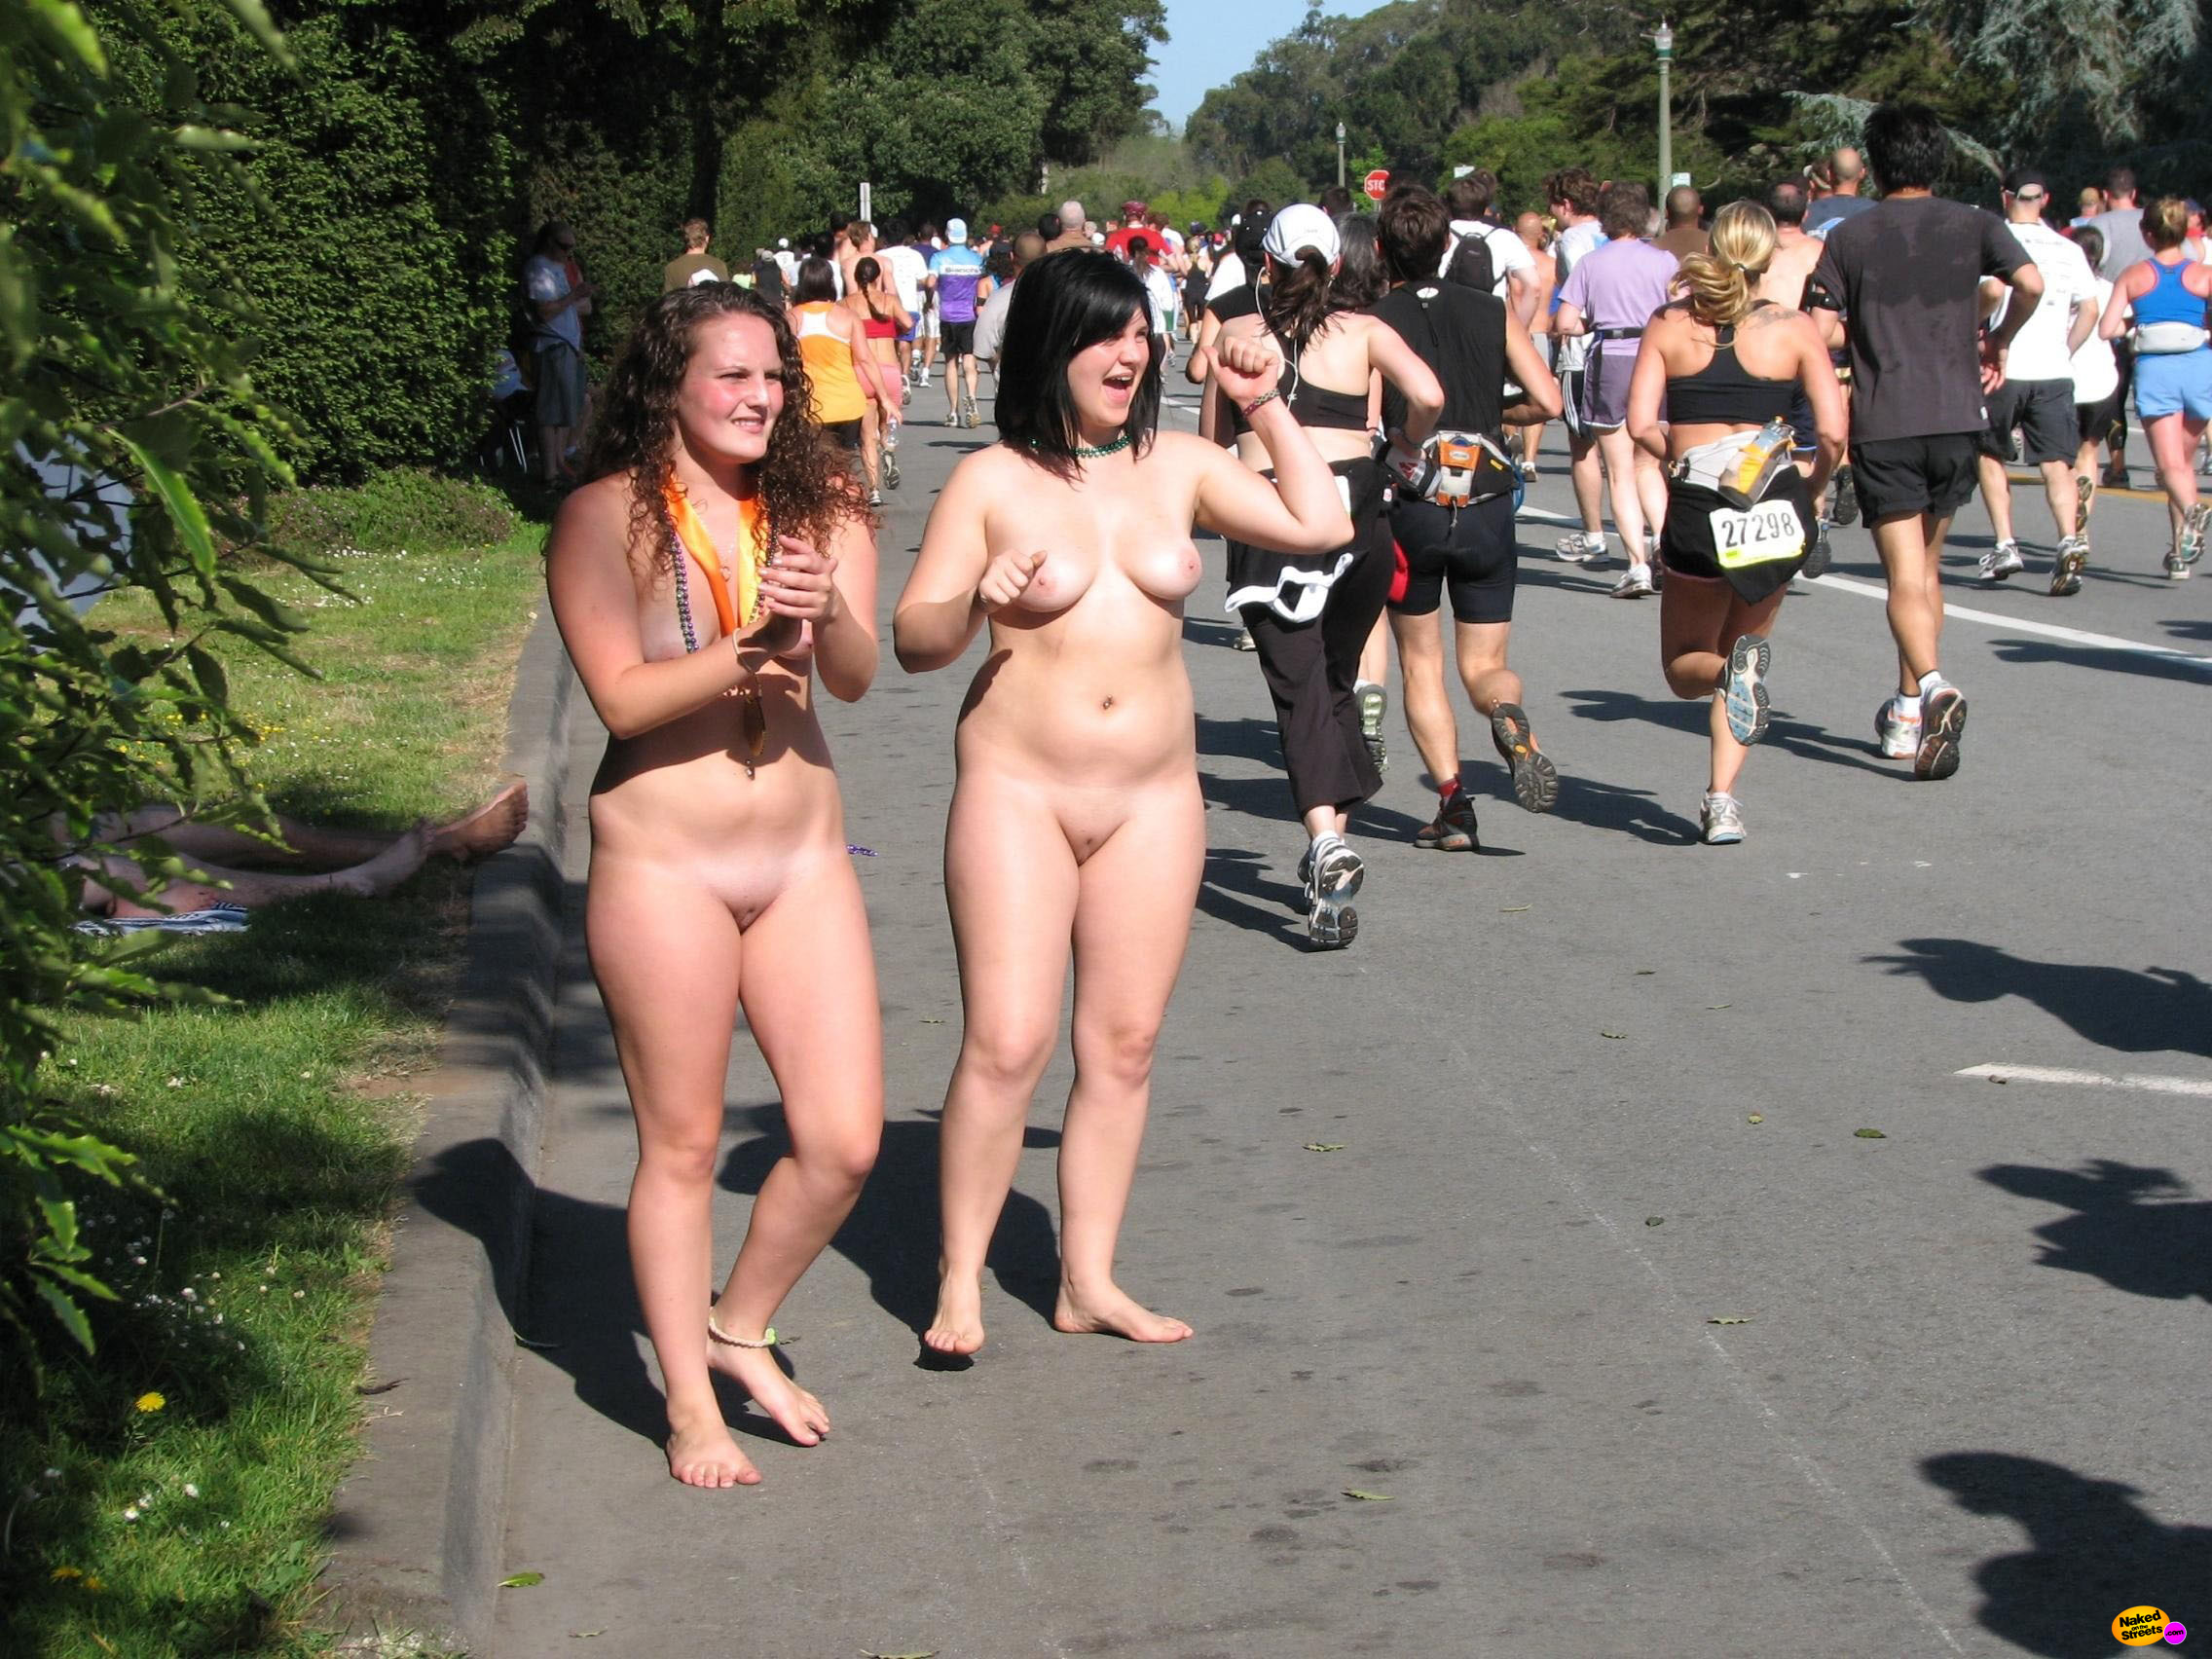 Two chubby naked teens cheer on marathon runners on a dare picture image